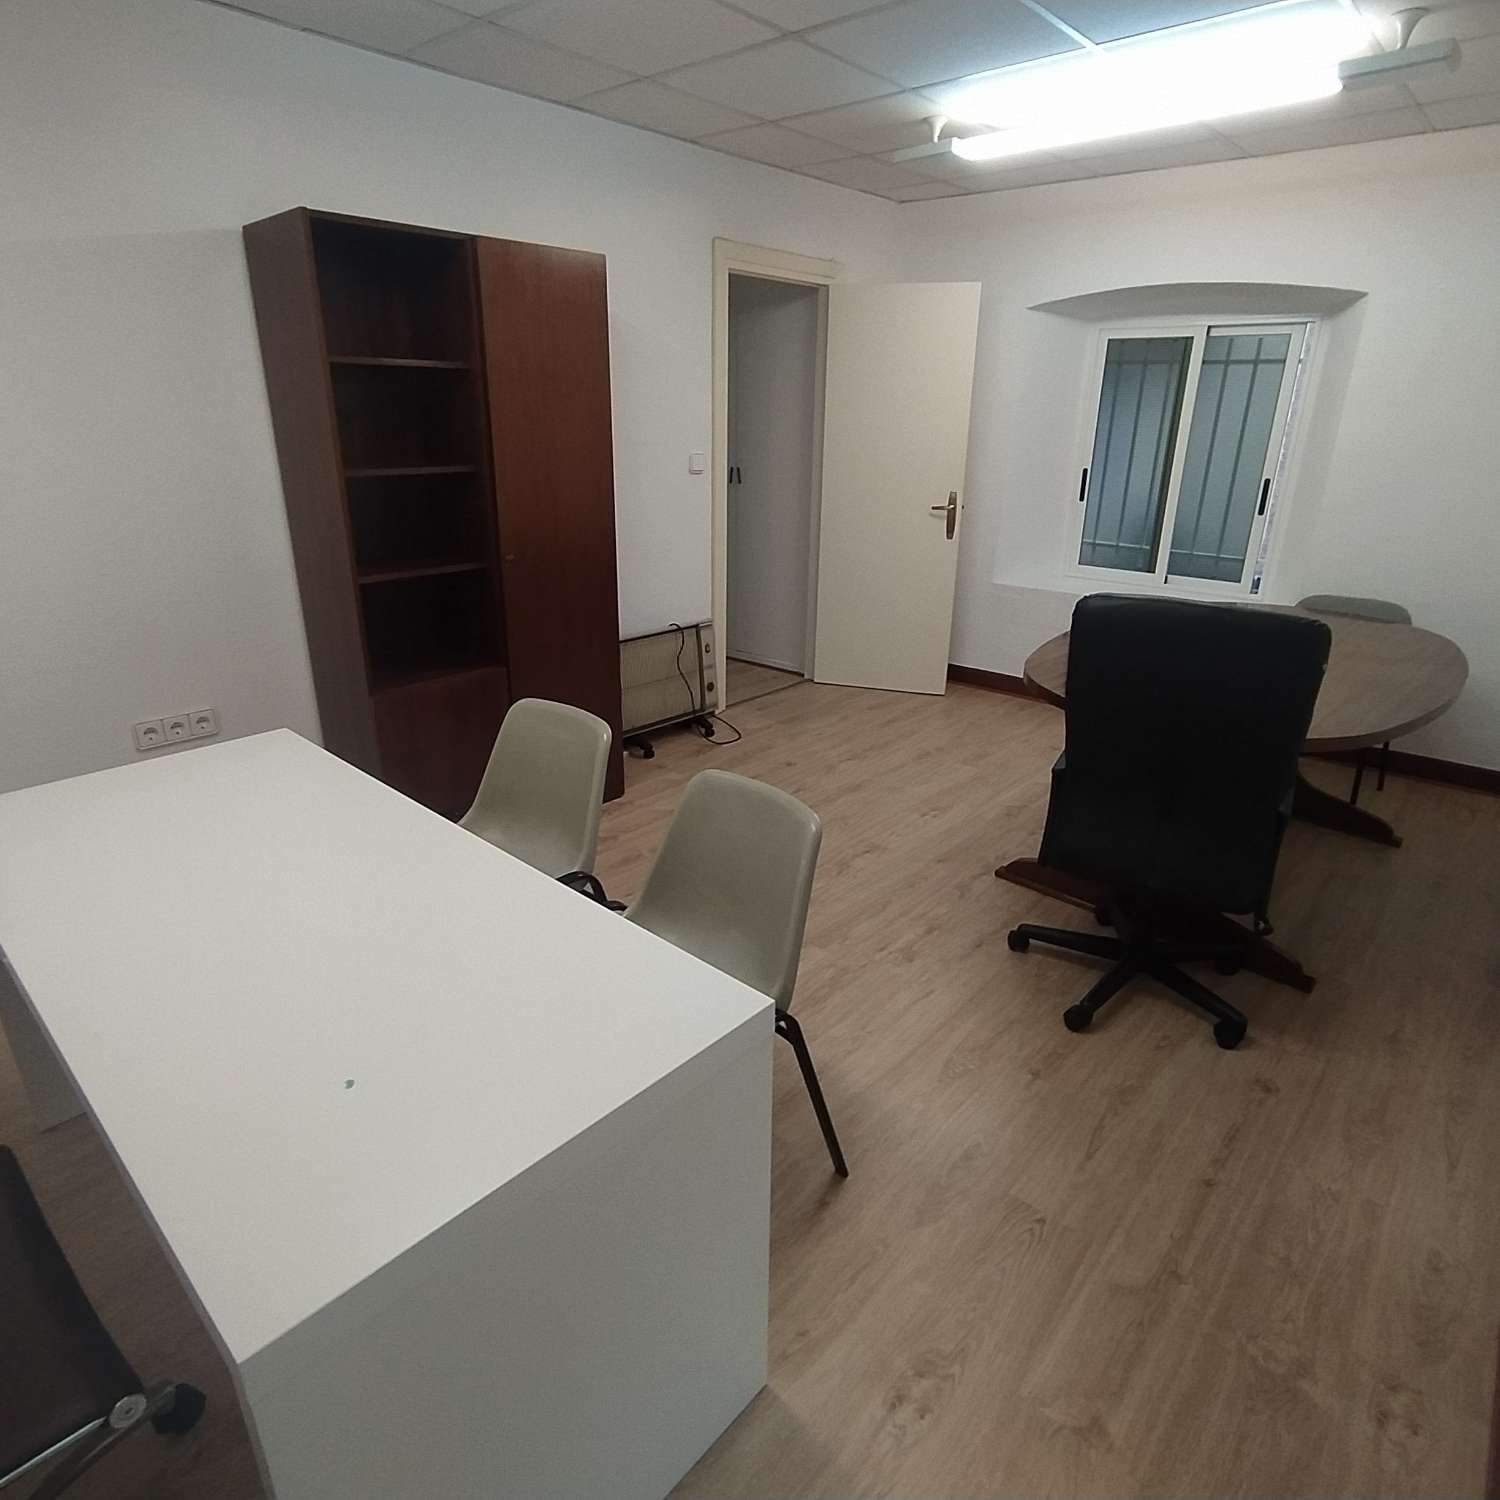 Office for rent in Castro-Urdiales